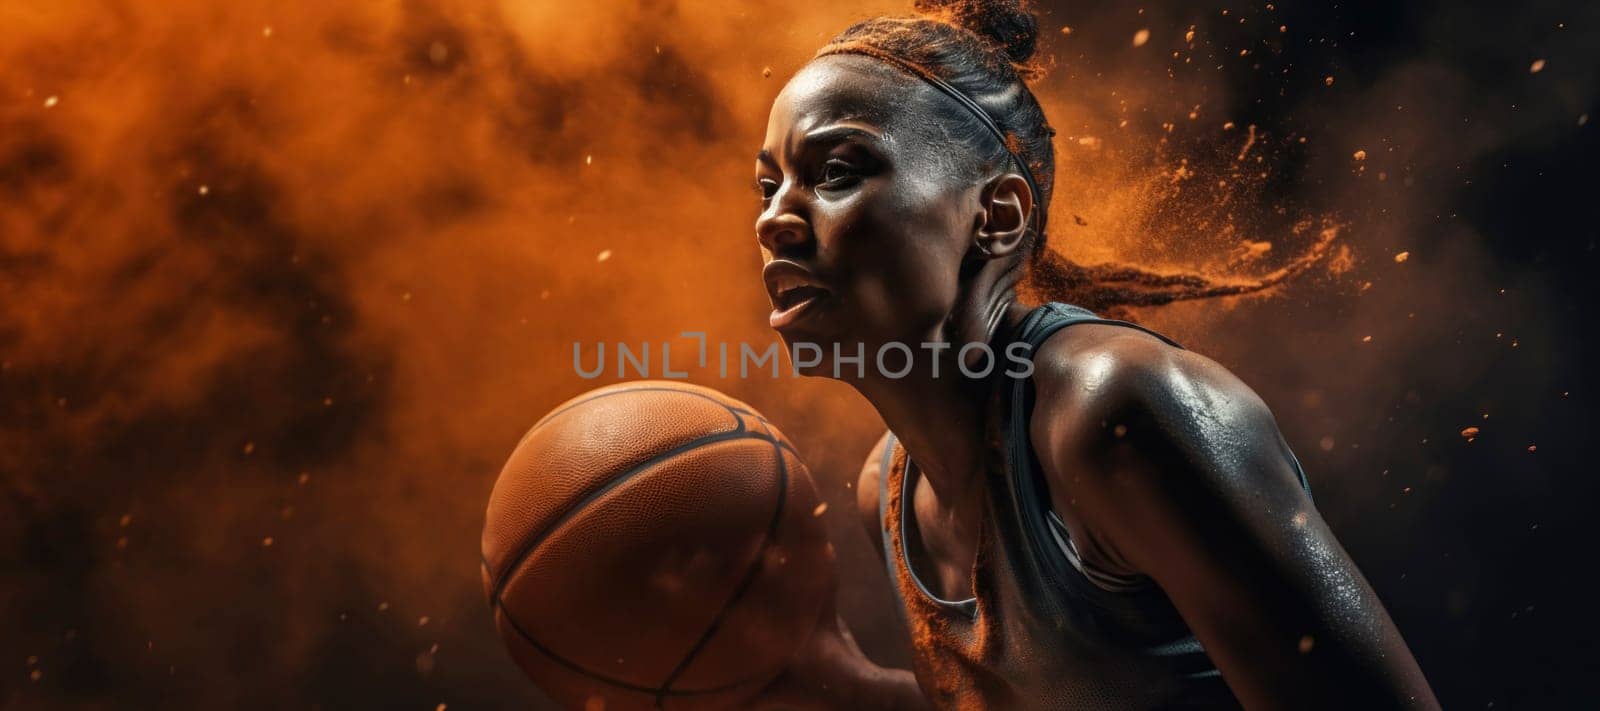 Female Basketball Player in Dynamic Action by andreyz